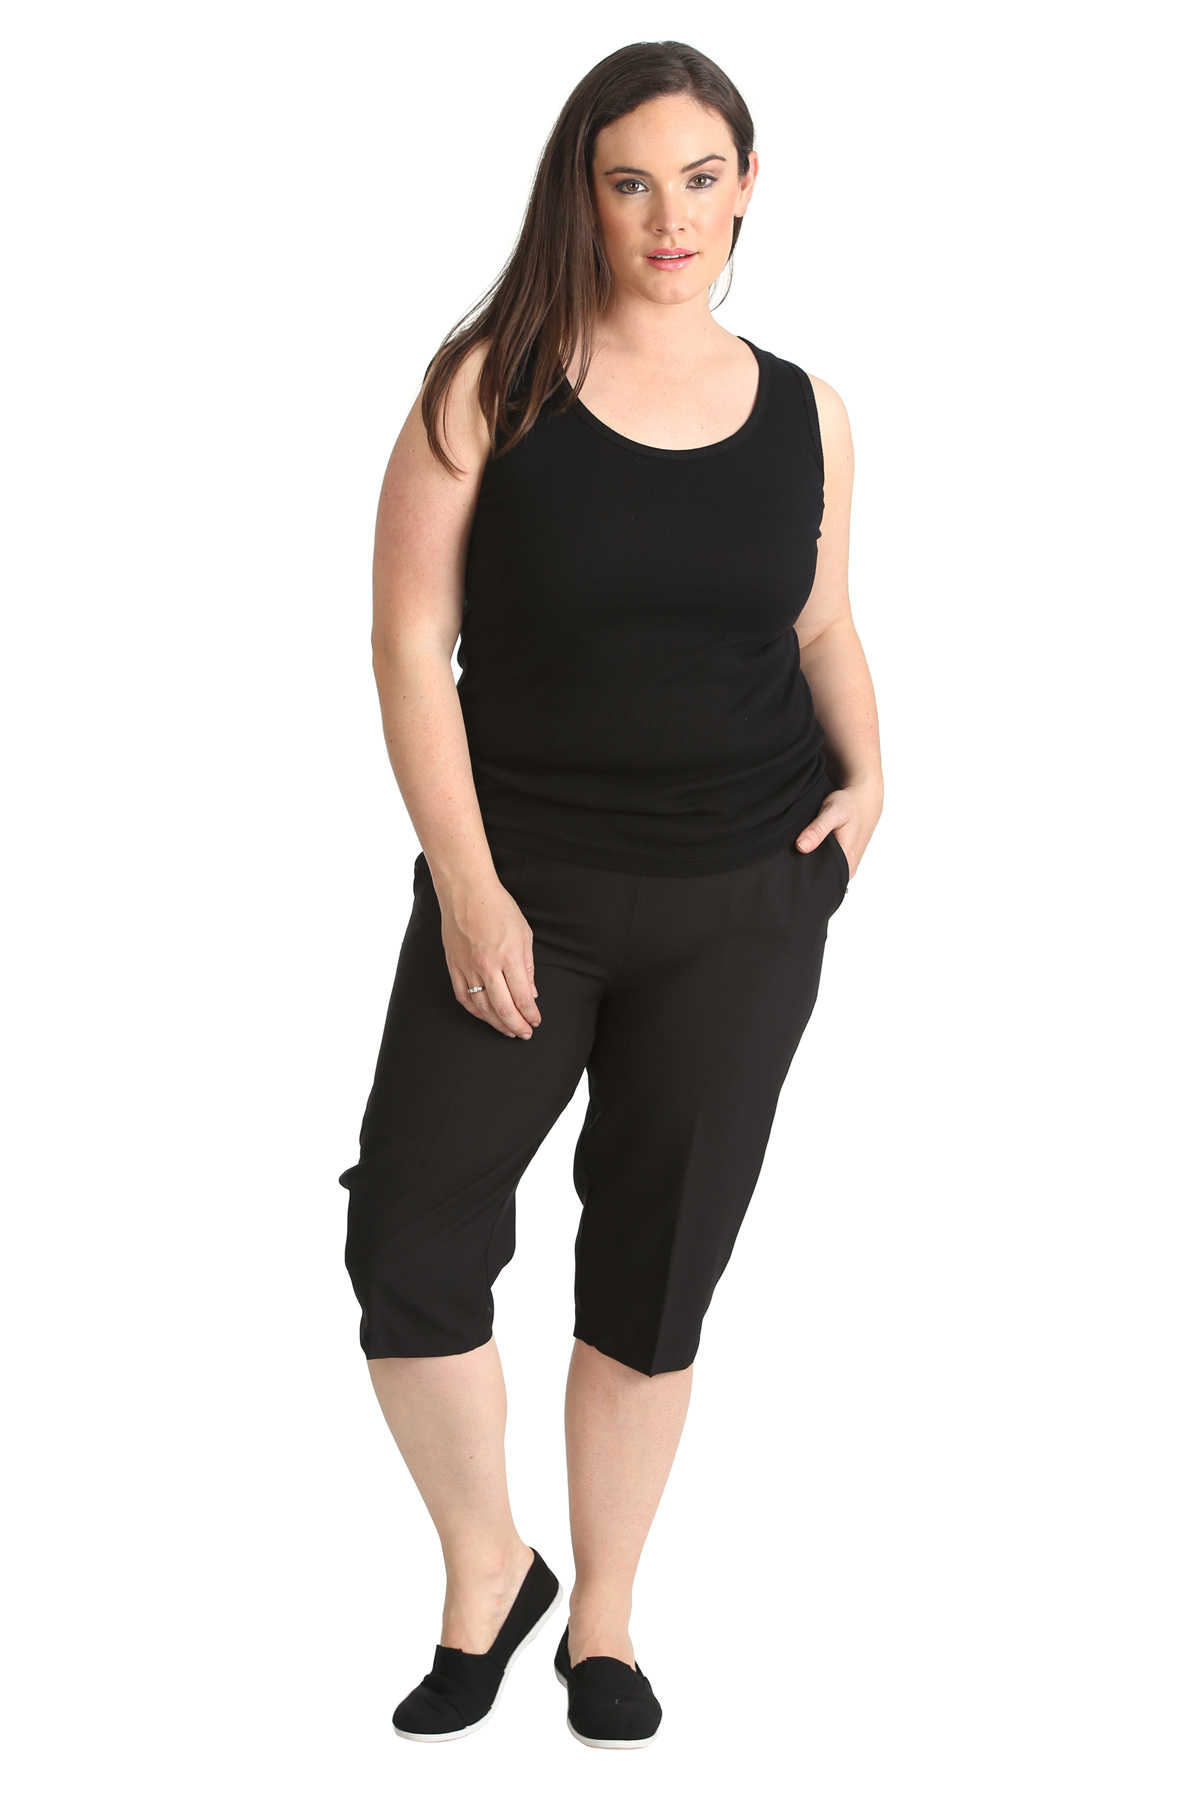 New Womens Plus Size Pants Ladies Cropped Trousers Elasticated Waist